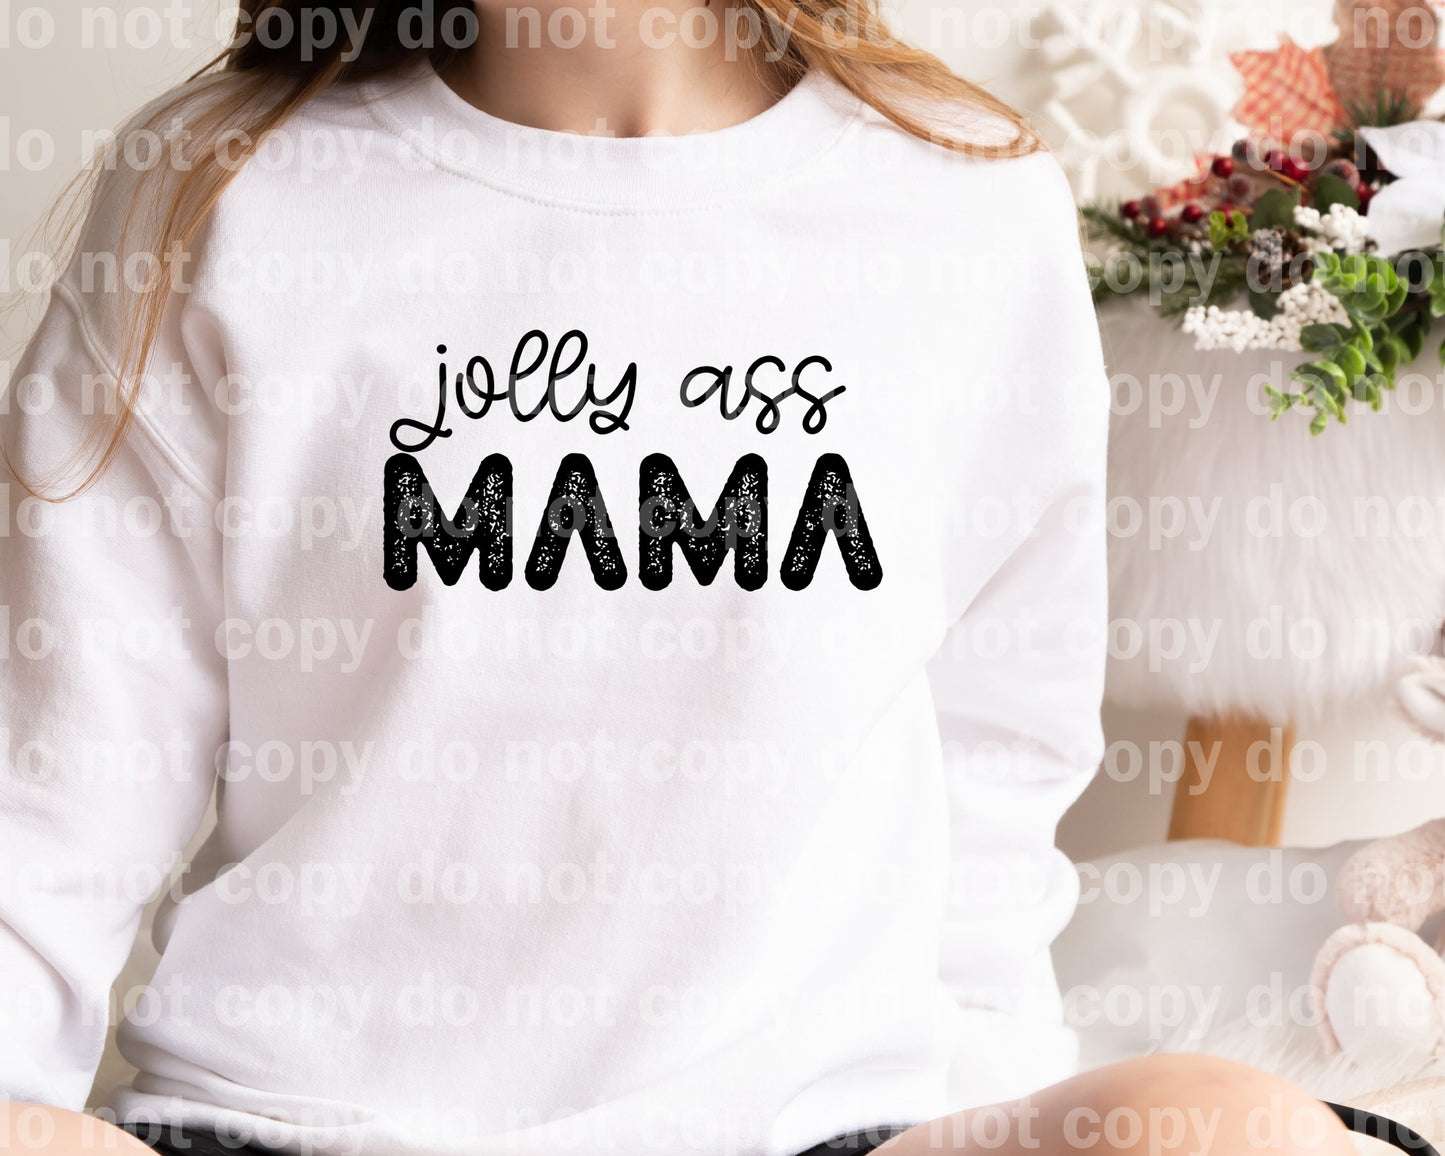 Jolly Ass Mama Typography Multicolor/Black/White Dream Print or Sublimation Print